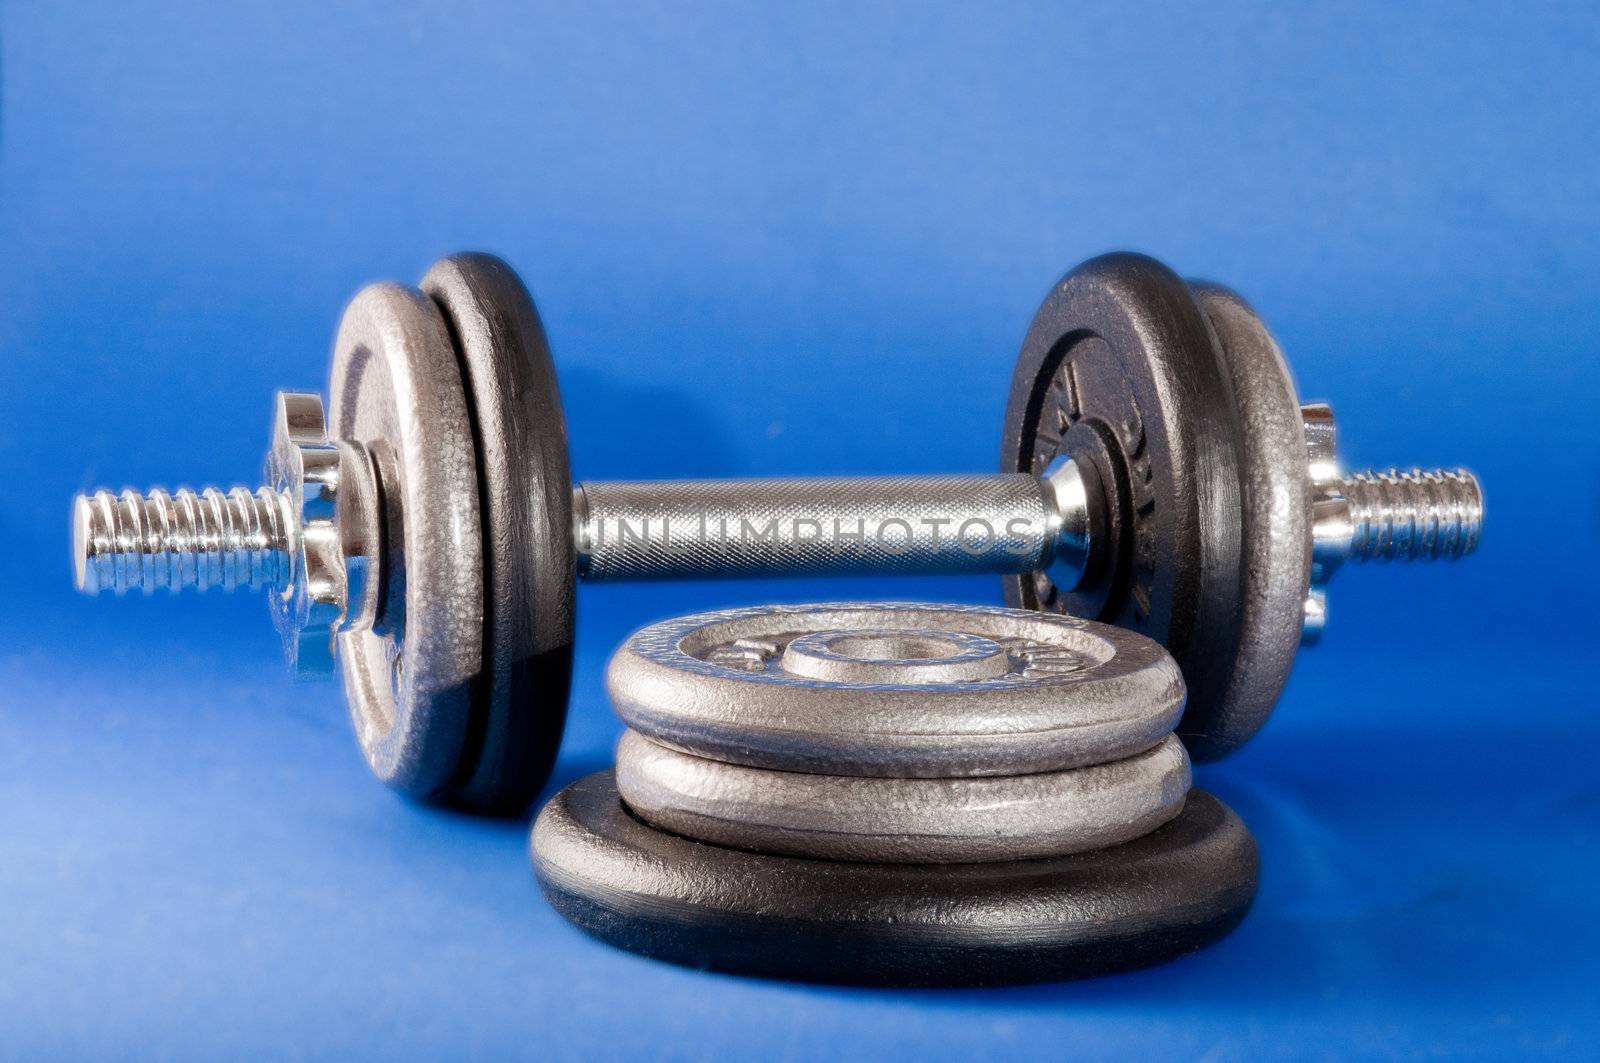 Barbell with free weights on a blue background